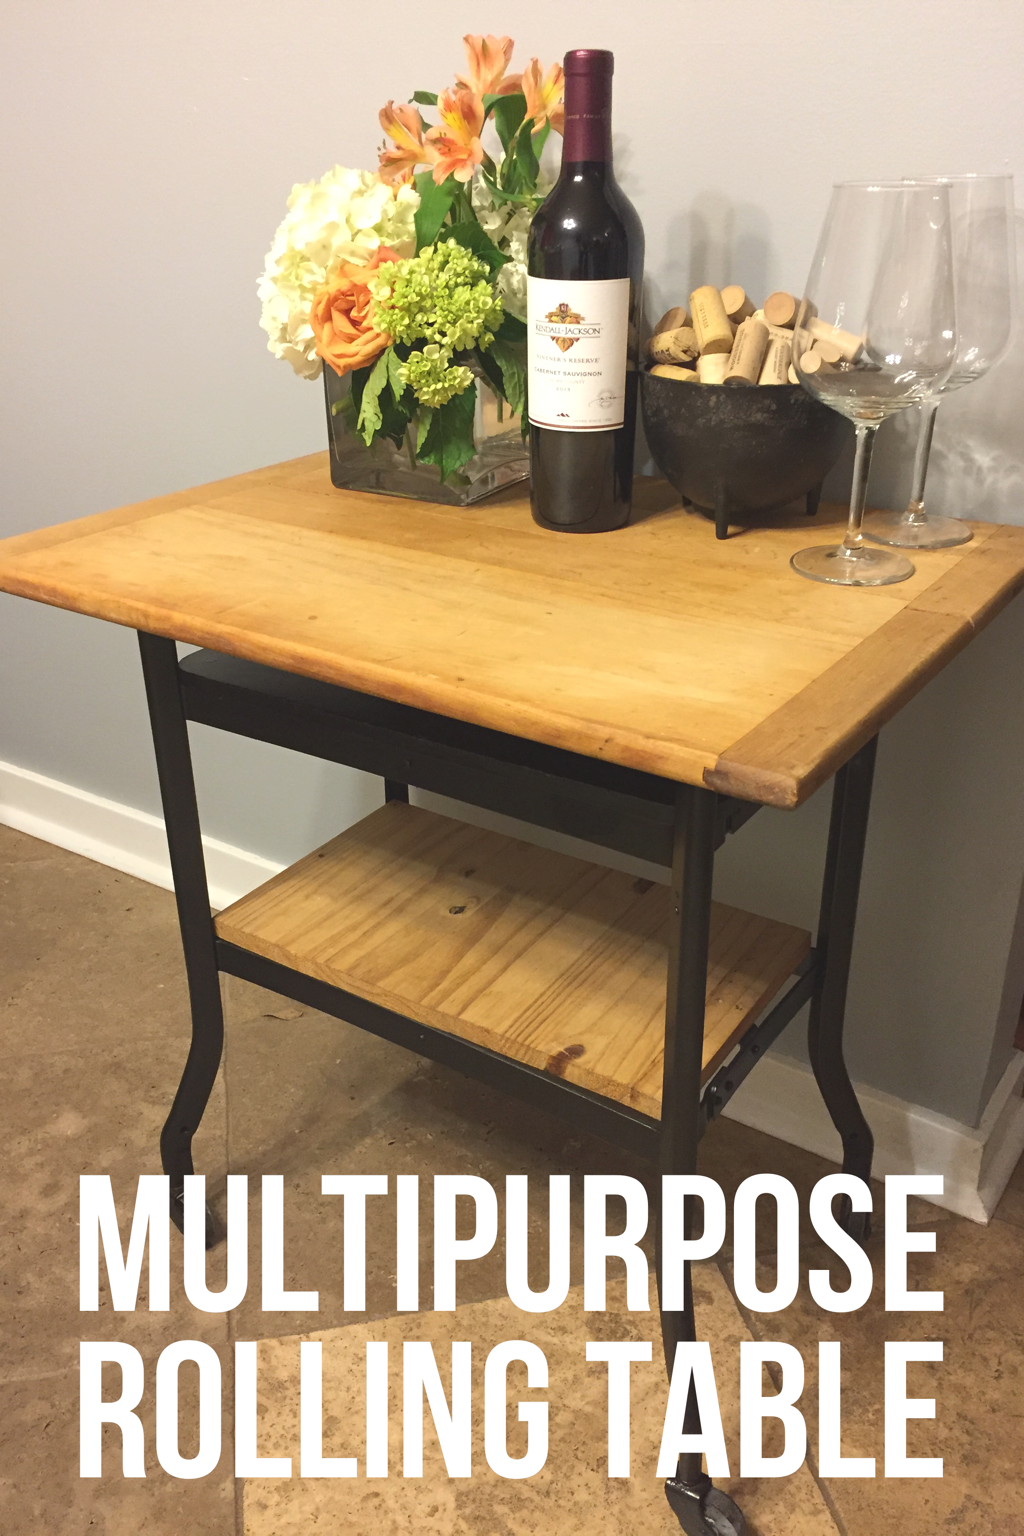 PictureStep by step tutorial on how to upcycle an old rolling cart and a cutting board.